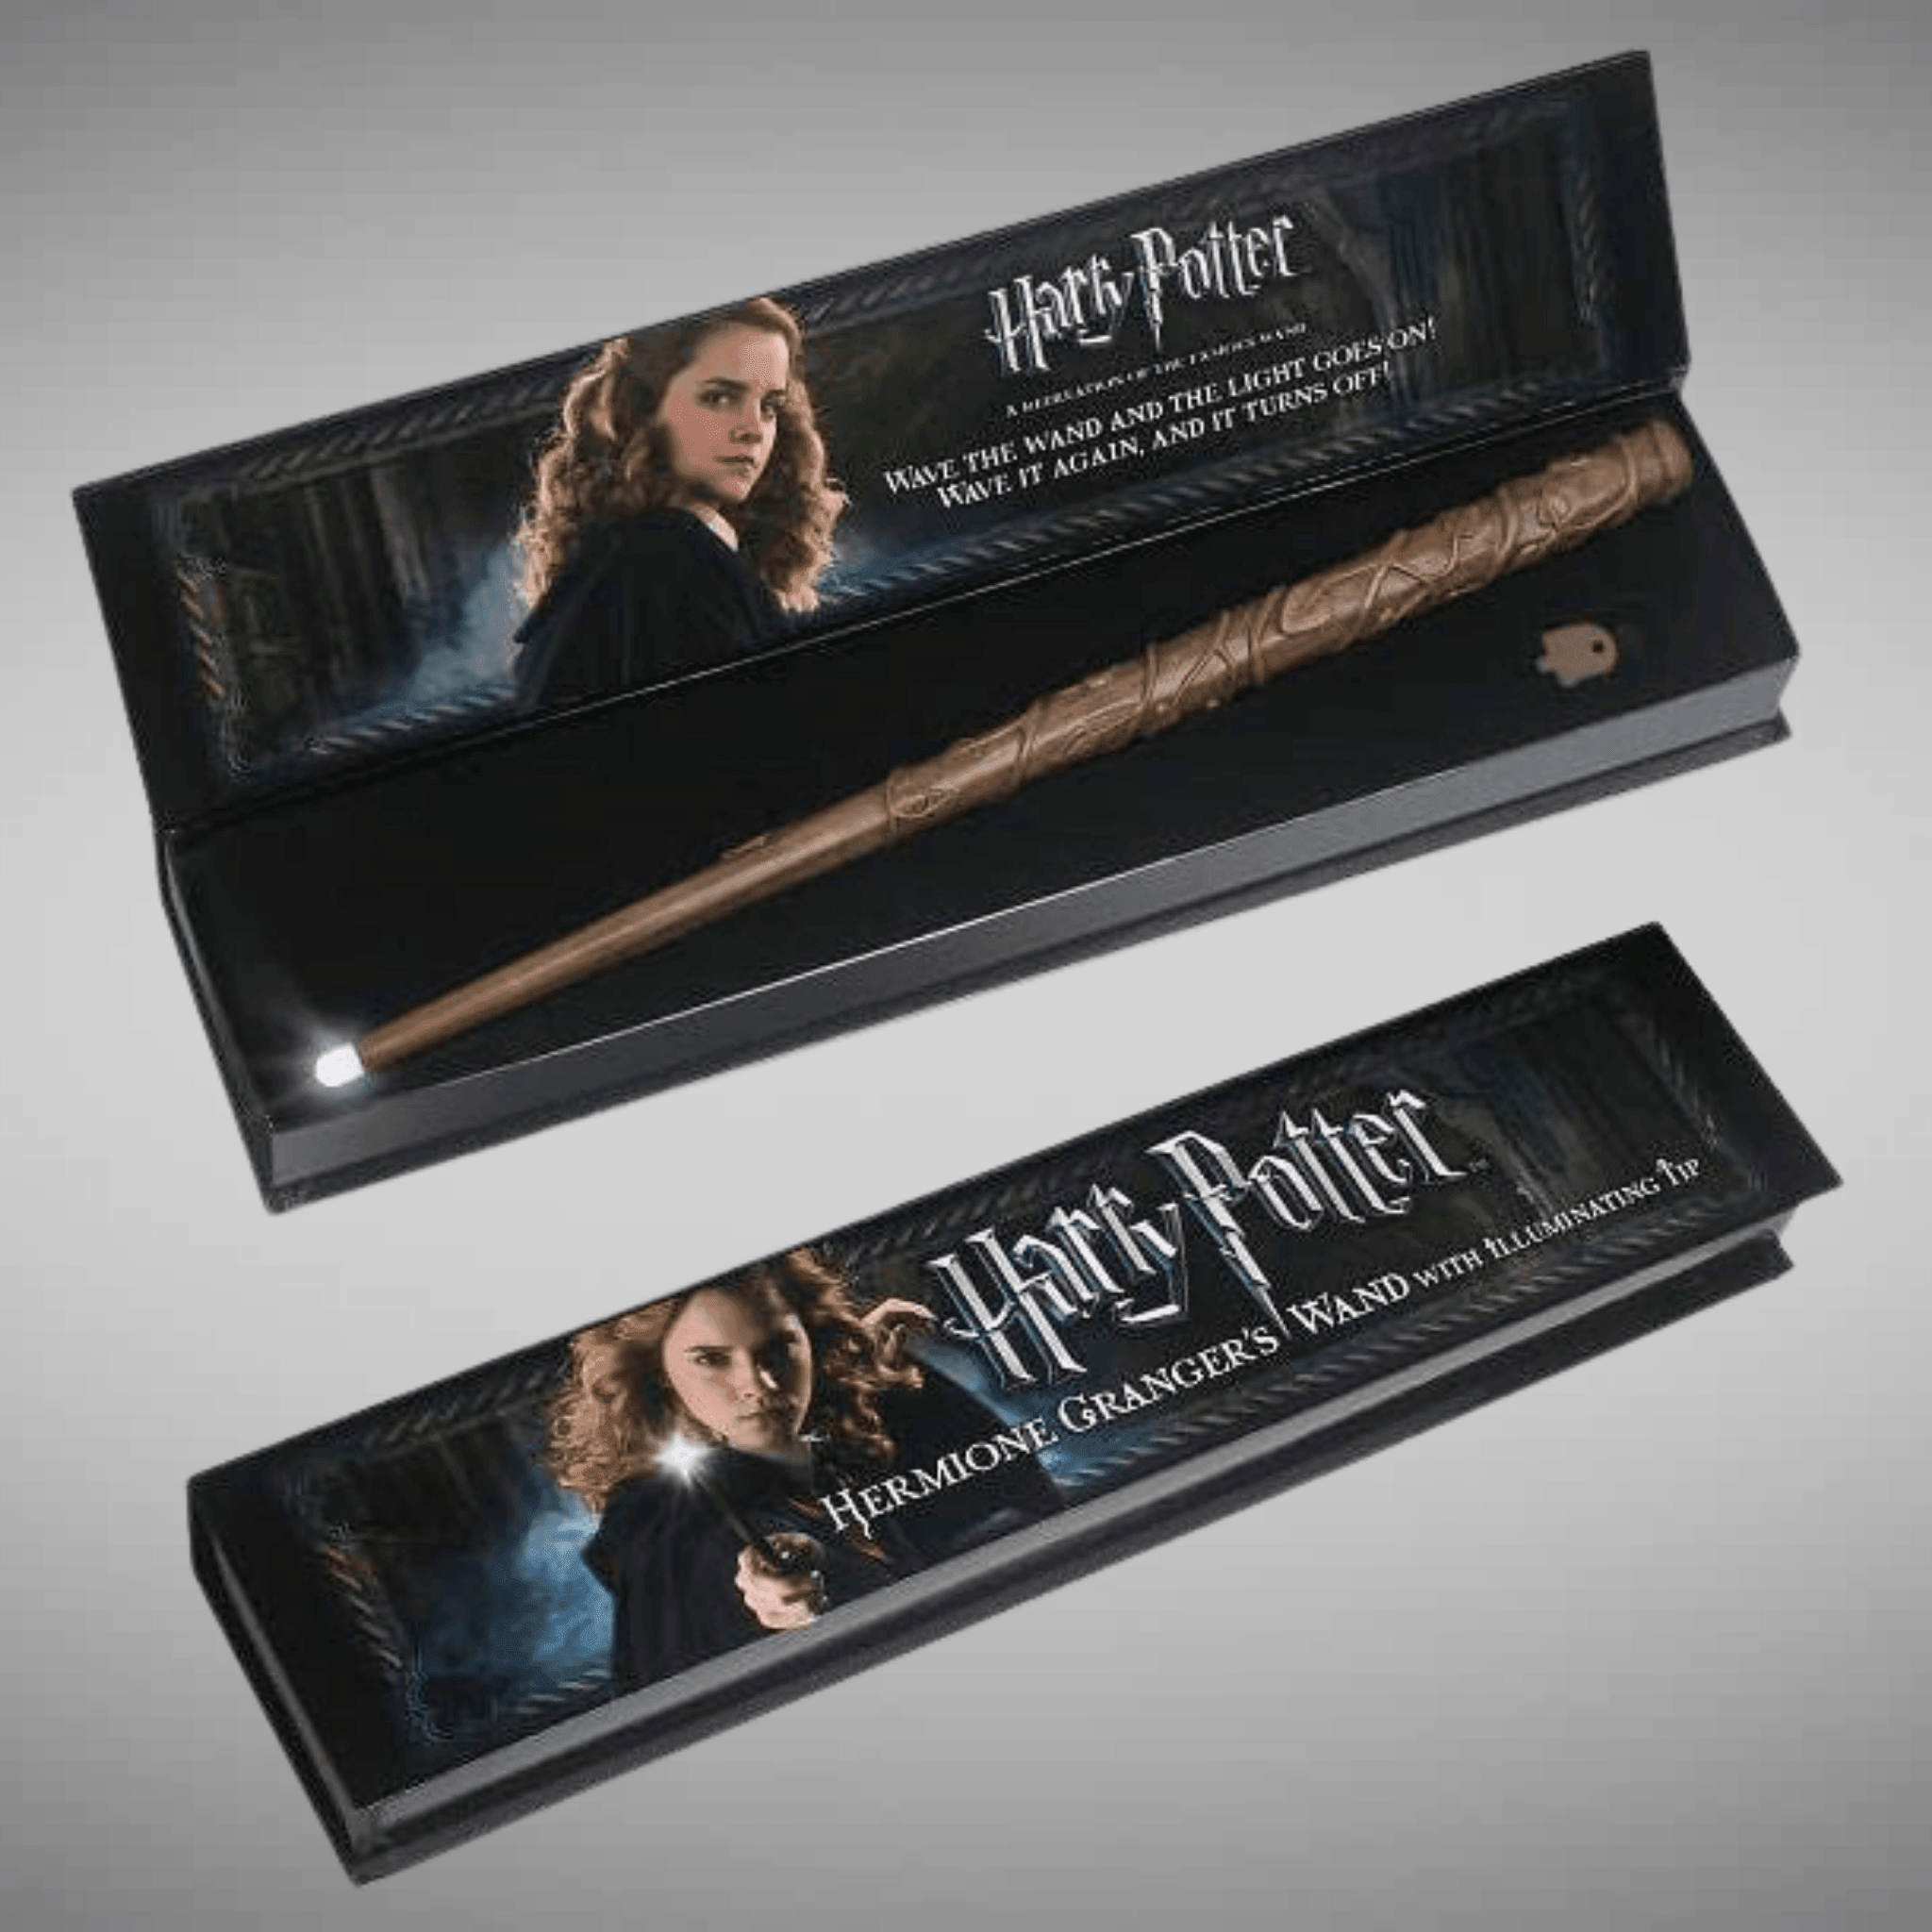 Noble collection Harry Potter Hermone Granger Wand Pen+Bookmark Multicolor